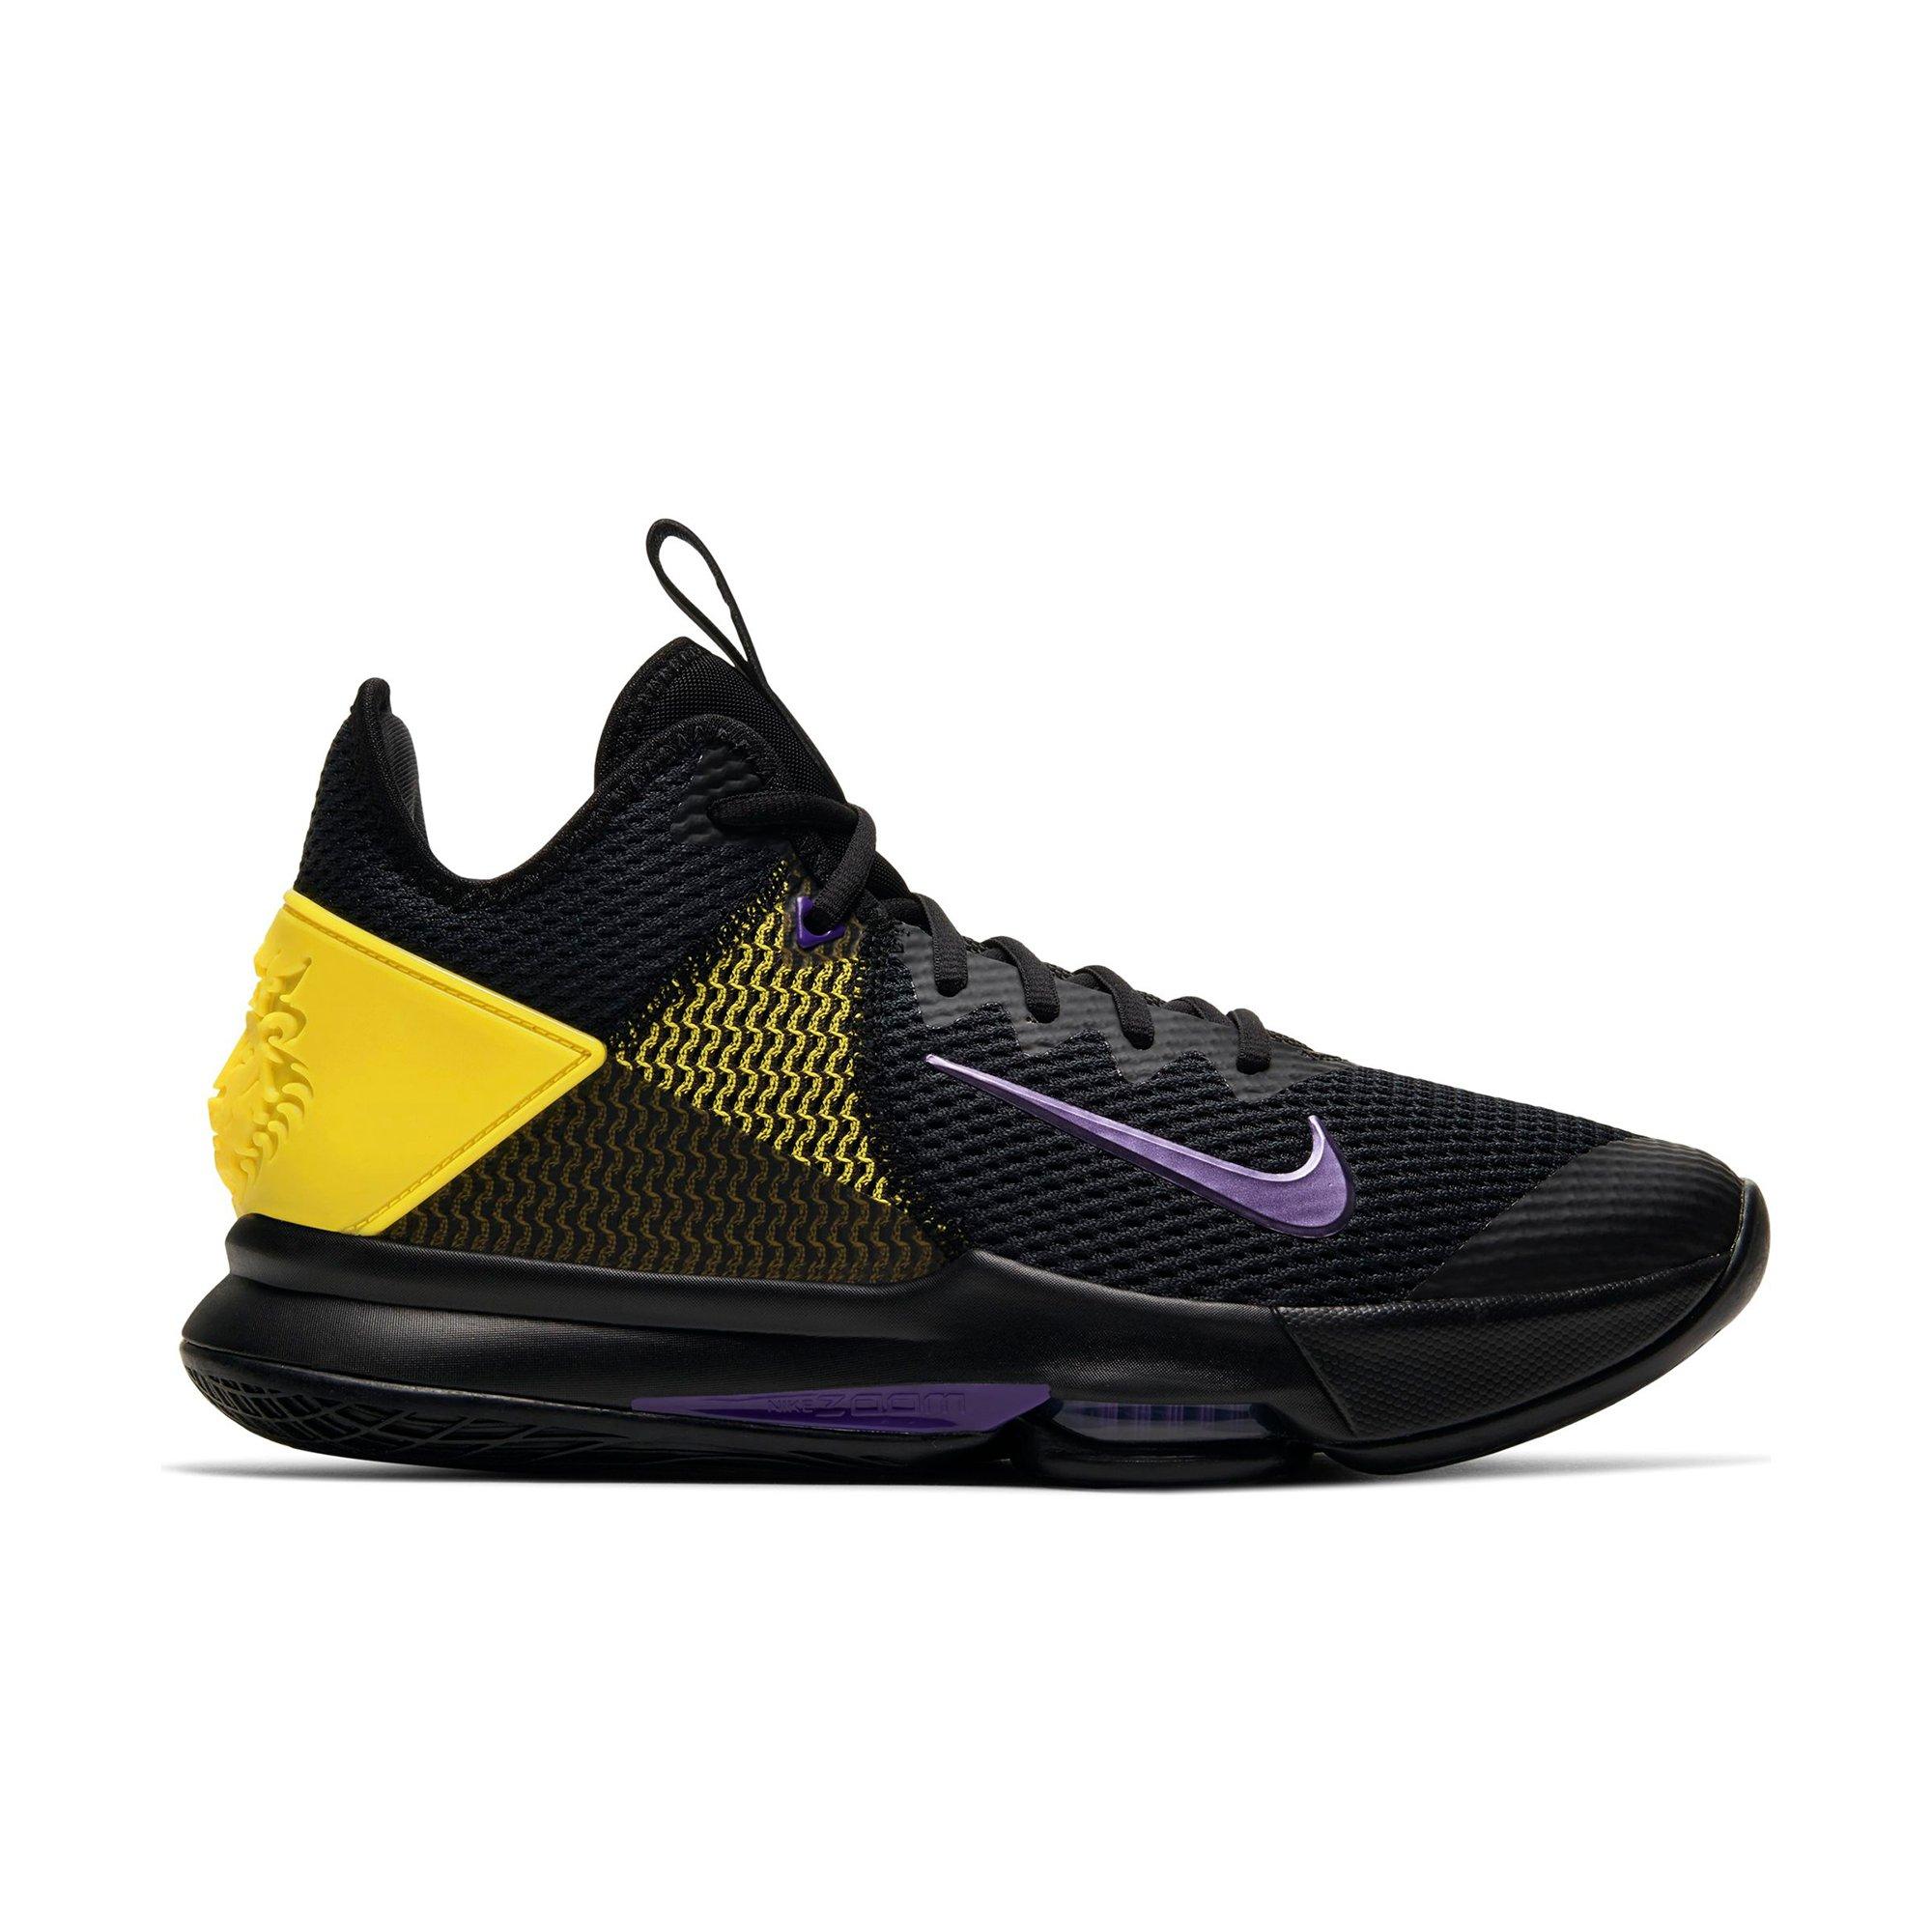 lebron james shoes purple and yellow